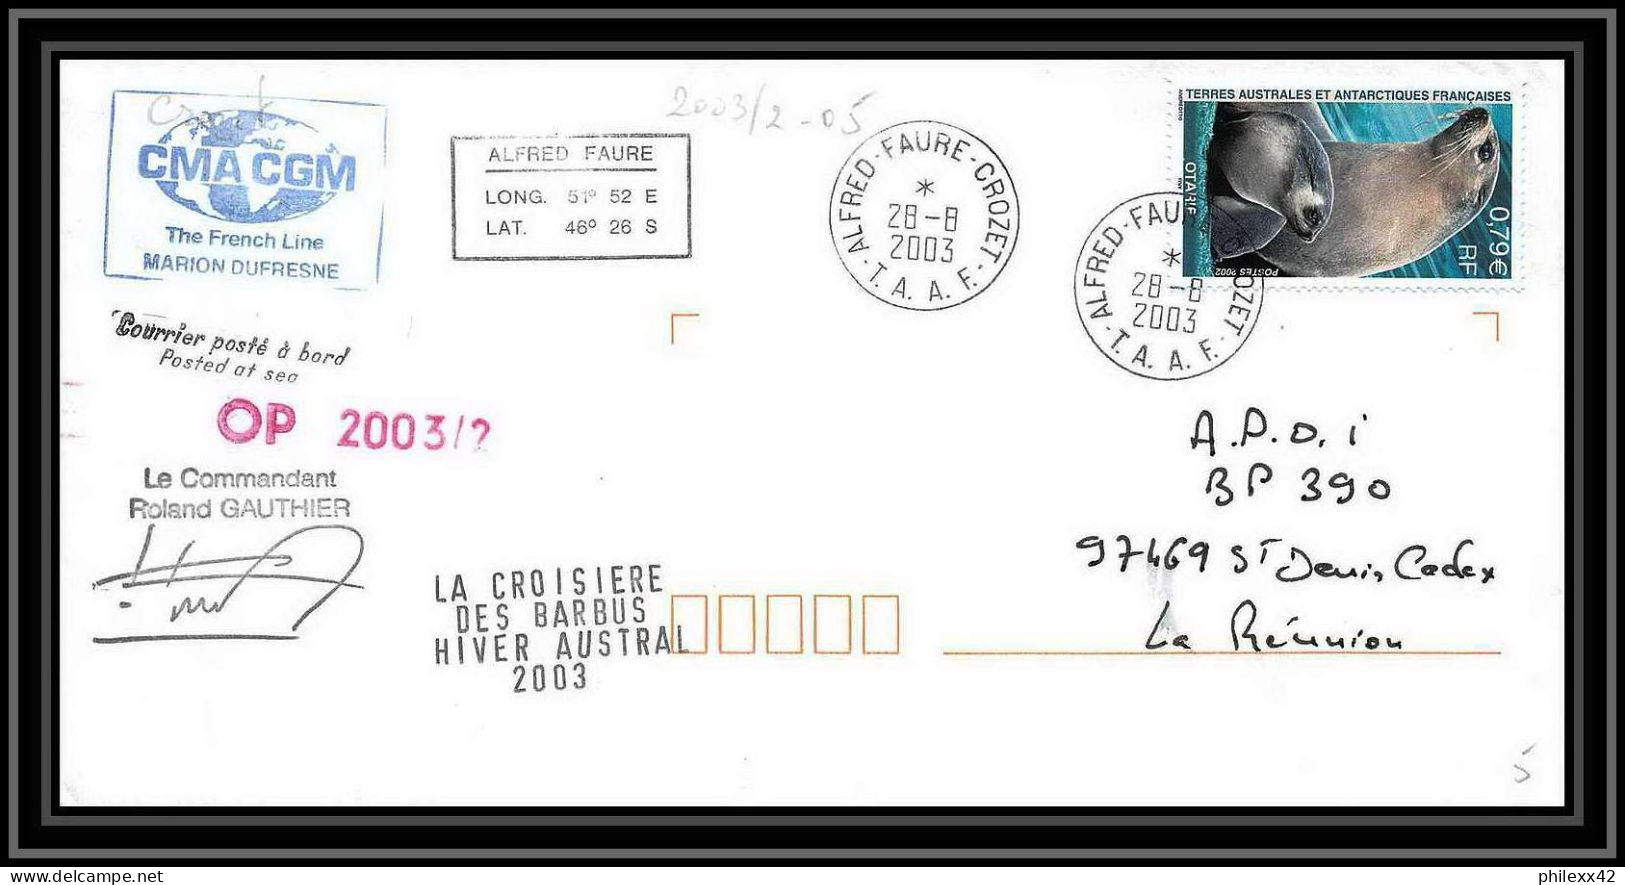 2401 Dufresne 2 Signé Signed Op 2003/2 Crozet 28/8/2003 N°247 ANTARCTIC Terres Australes (taaf) Lettre Cover Otarie Seal - Antarctic Expeditions